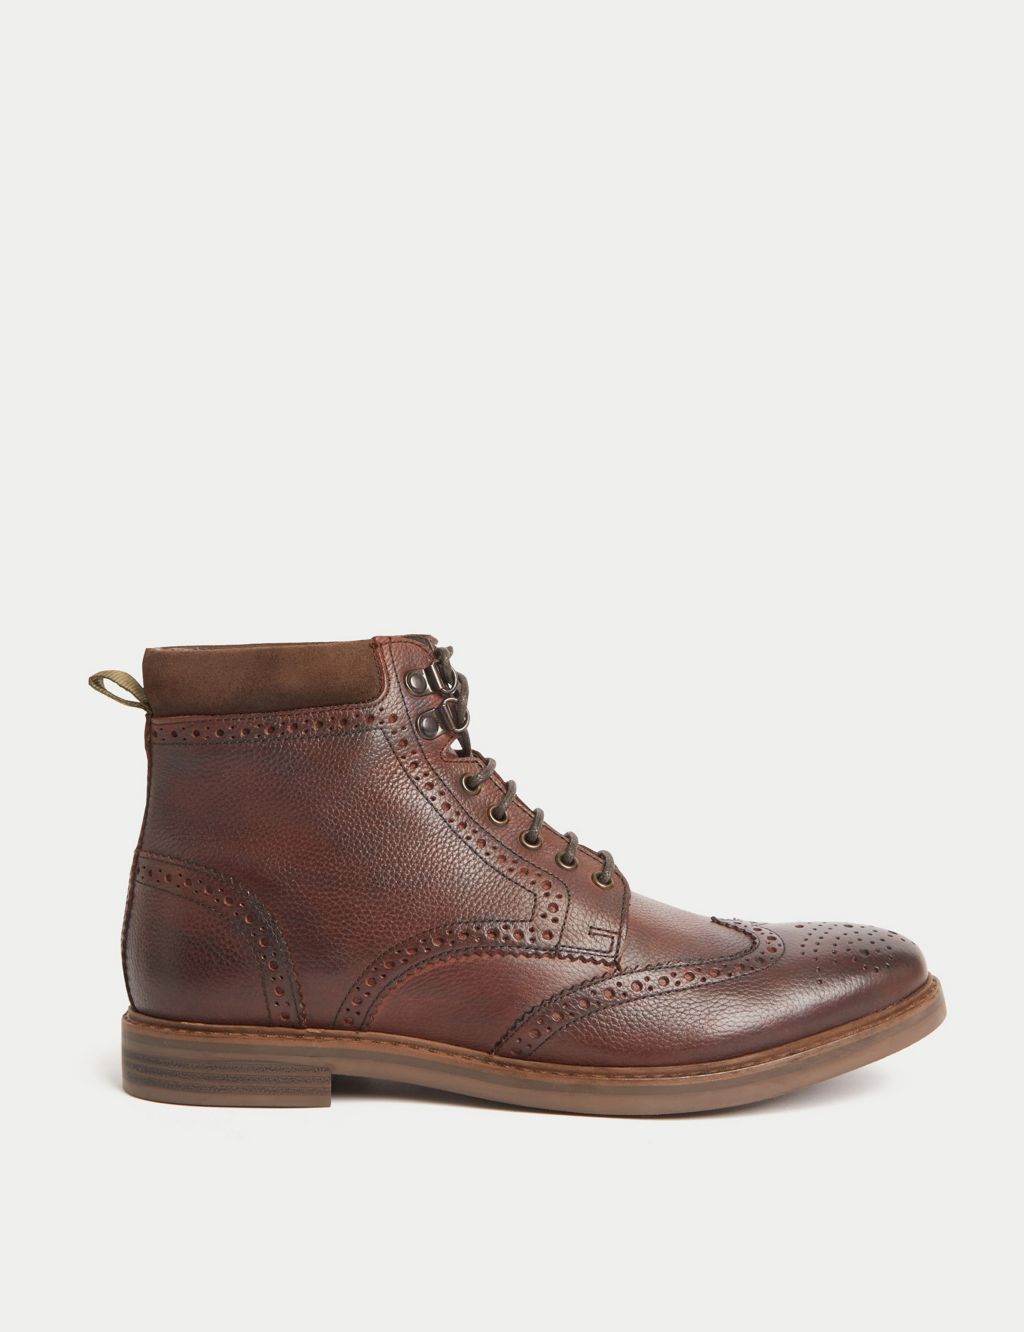 Leather Brogue Boot image 1